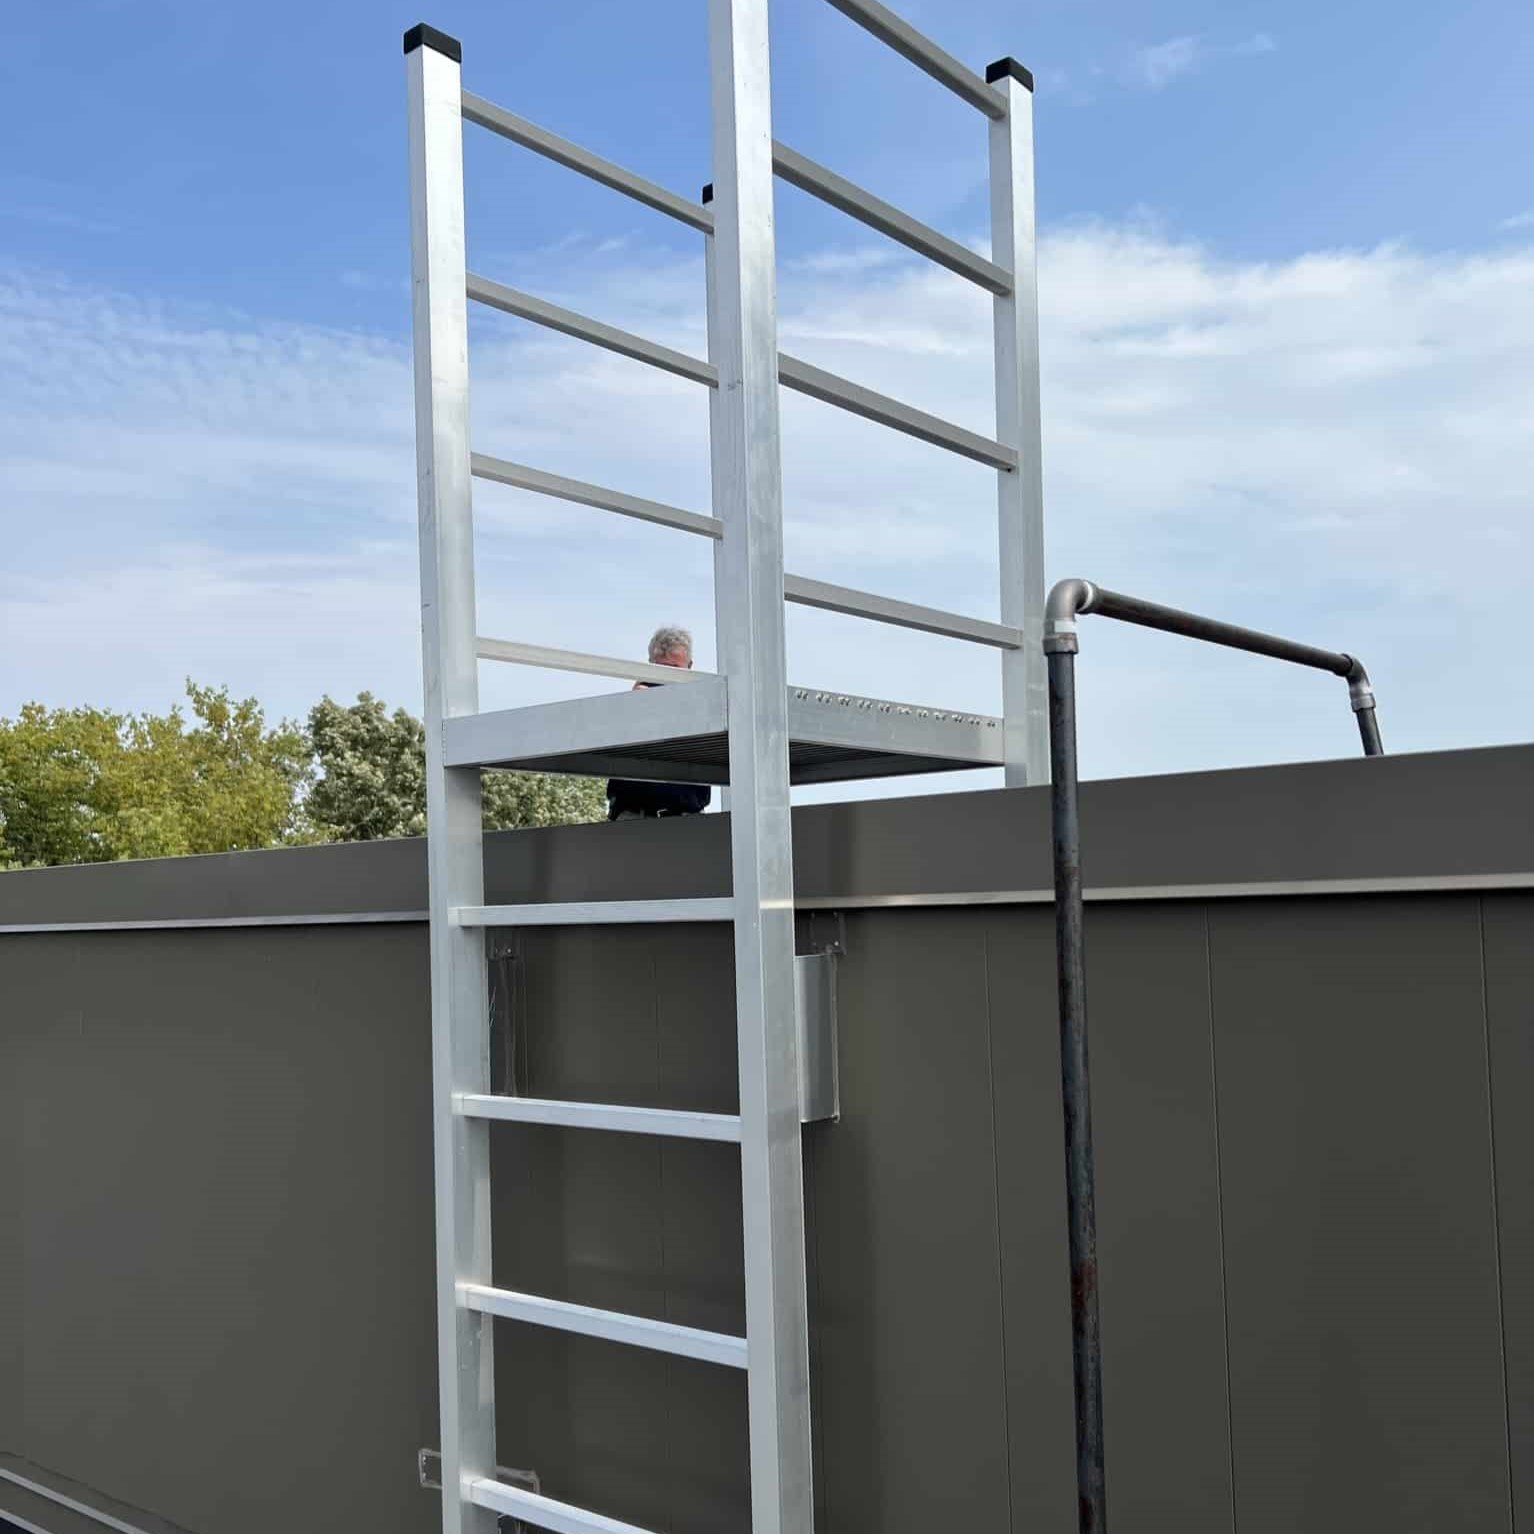 Which Type Of Ladder Is Permanently Attached To A Building Or Structure?